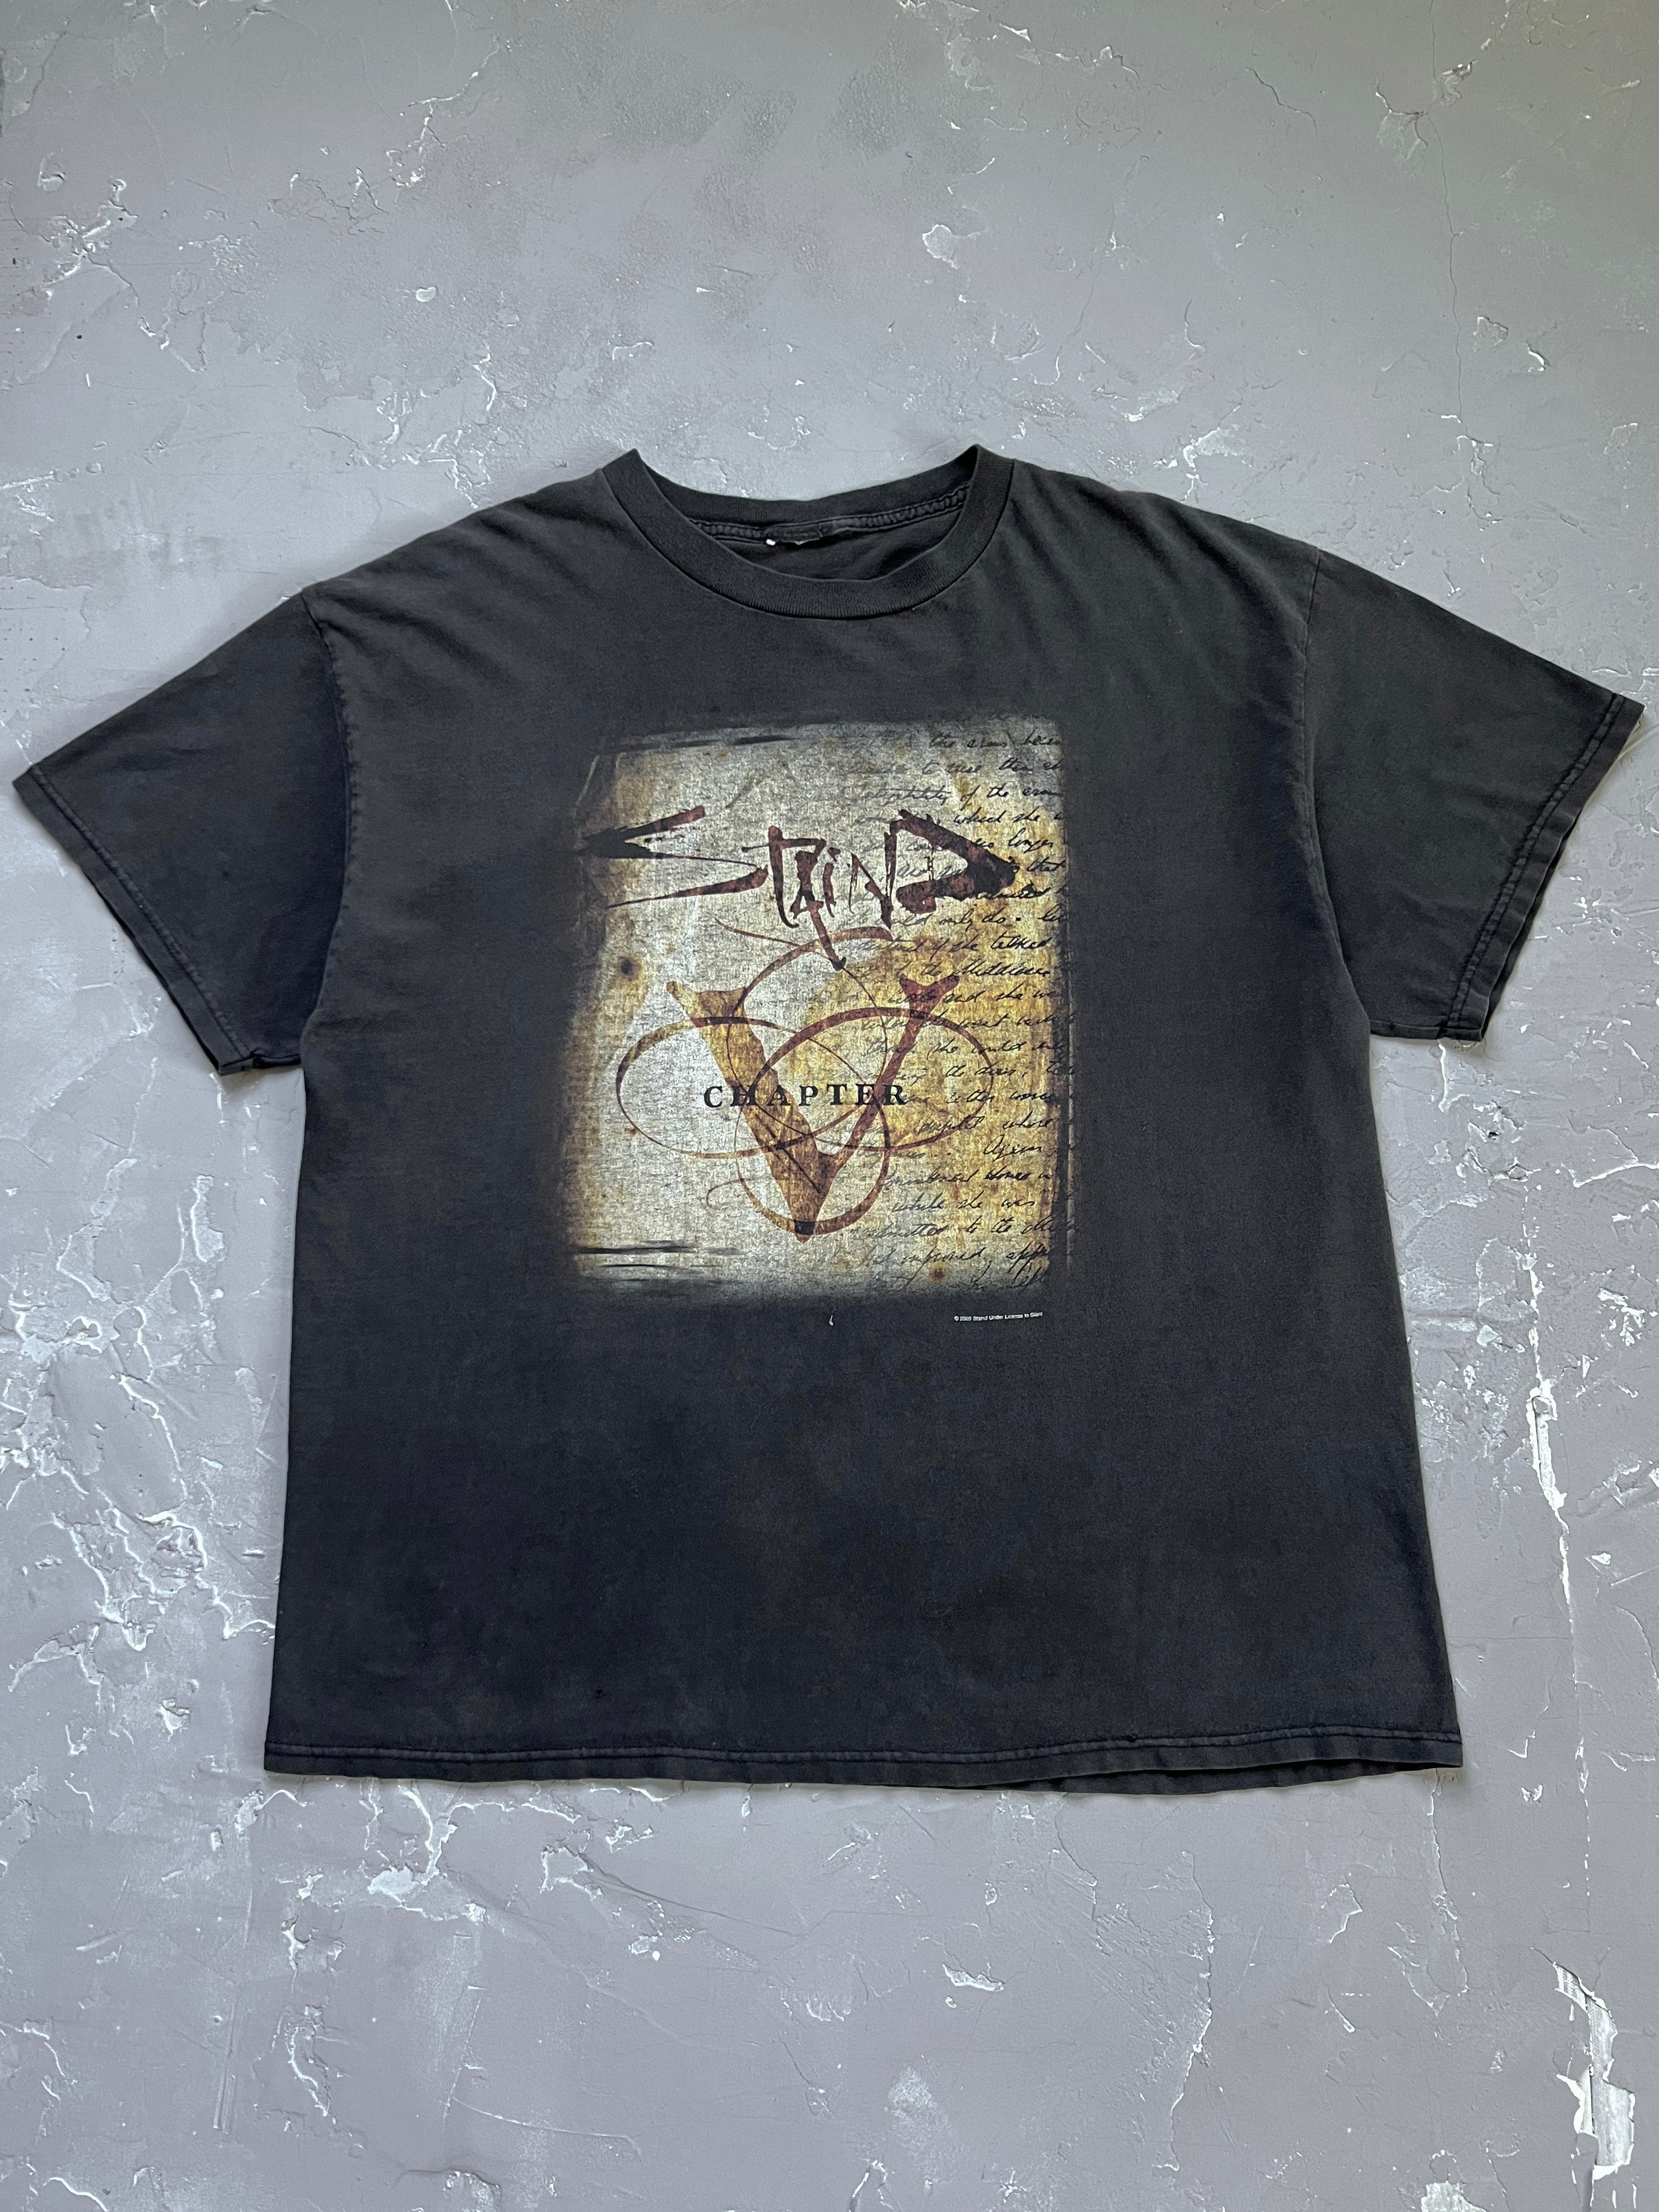 2000s Faded Black Staind Tour Tee [XL]